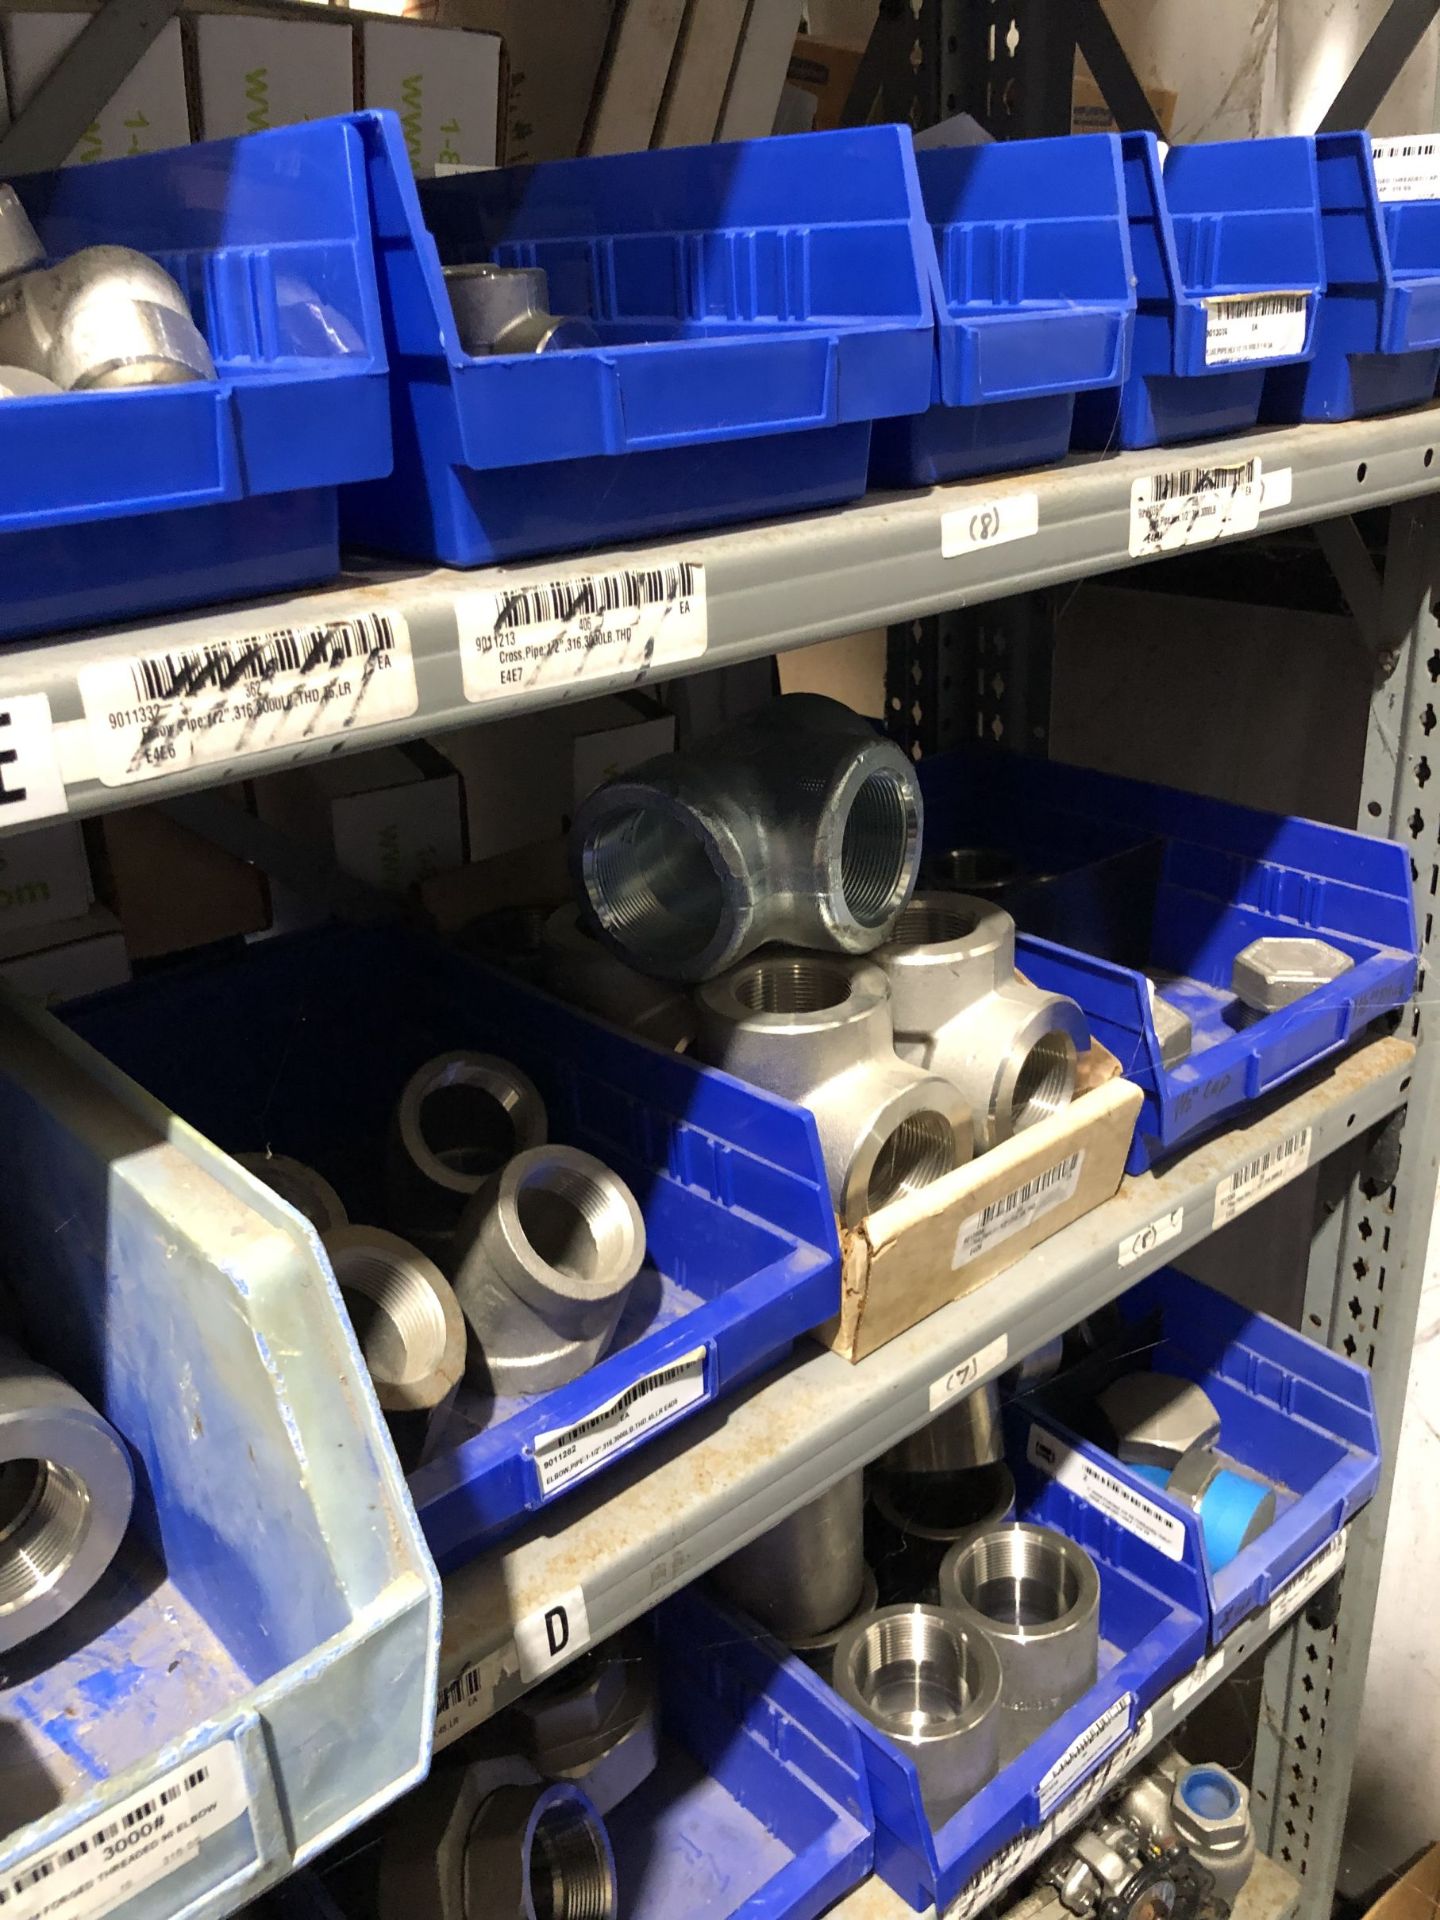 Maintenance Spares Lot: (6) Sections Of Light Duty Industrial Shelving and Contents - Image 10 of 16